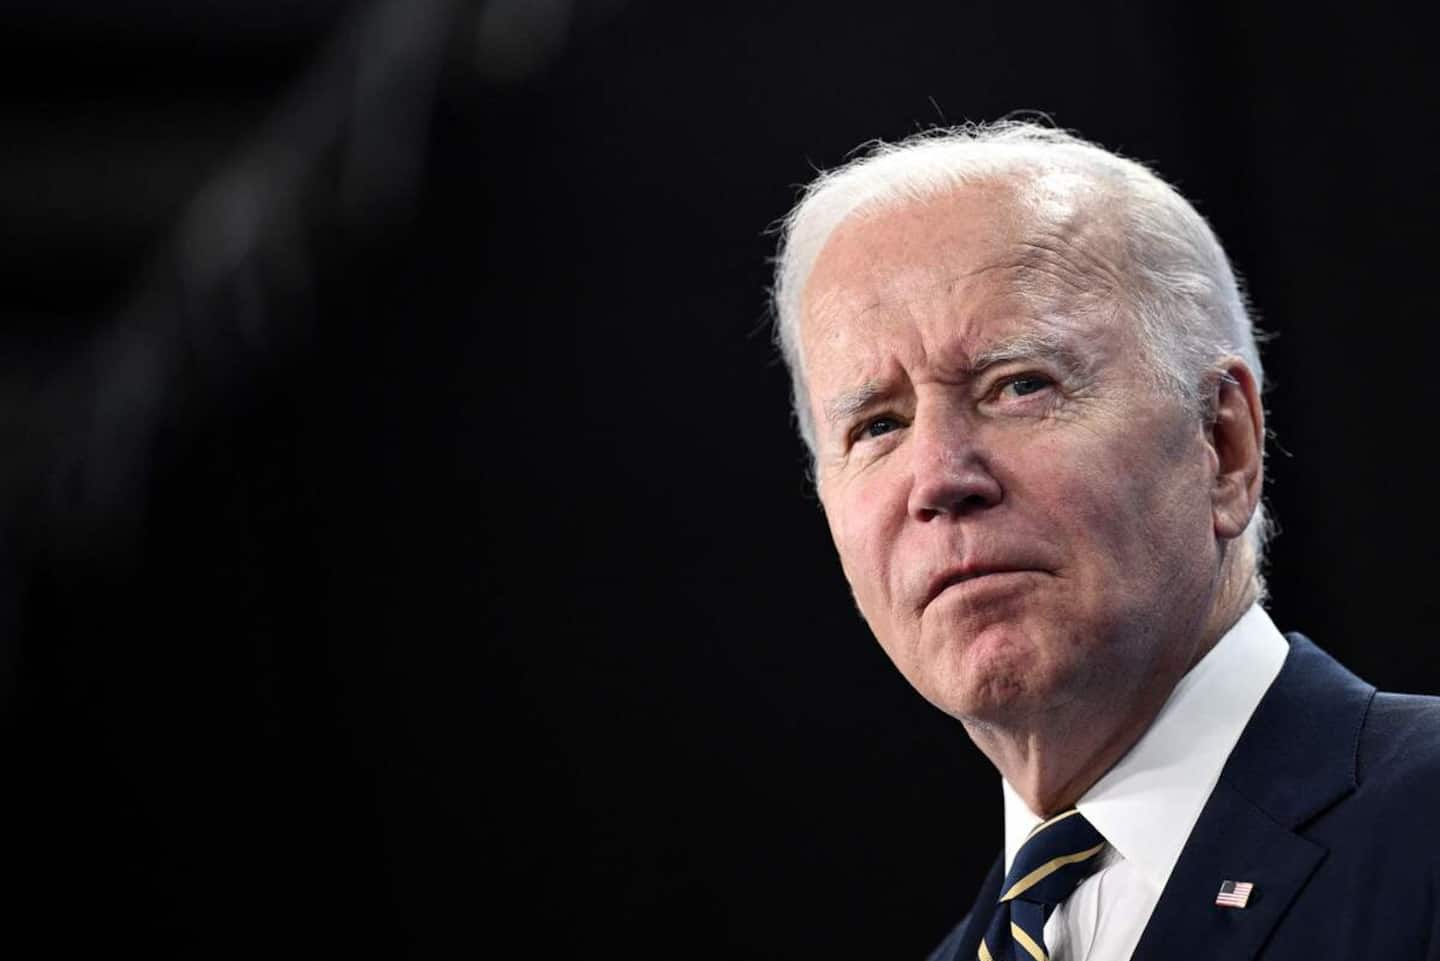 The United States “will not experience a recession”, says Joe Biden